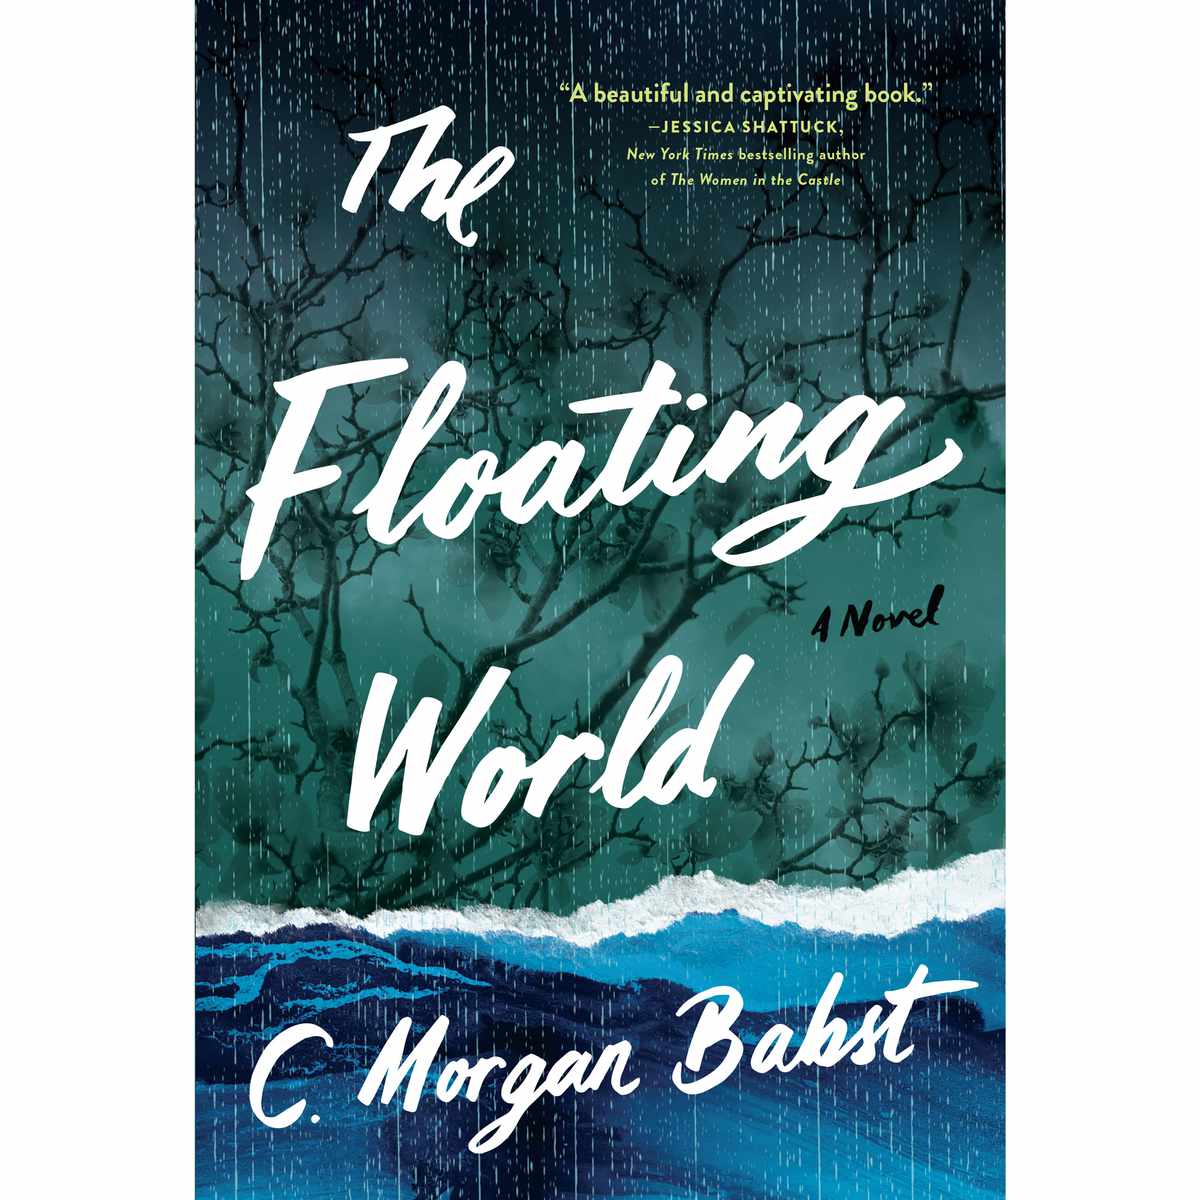 THE FLOATING WORLD BY C. MORGAN BABST